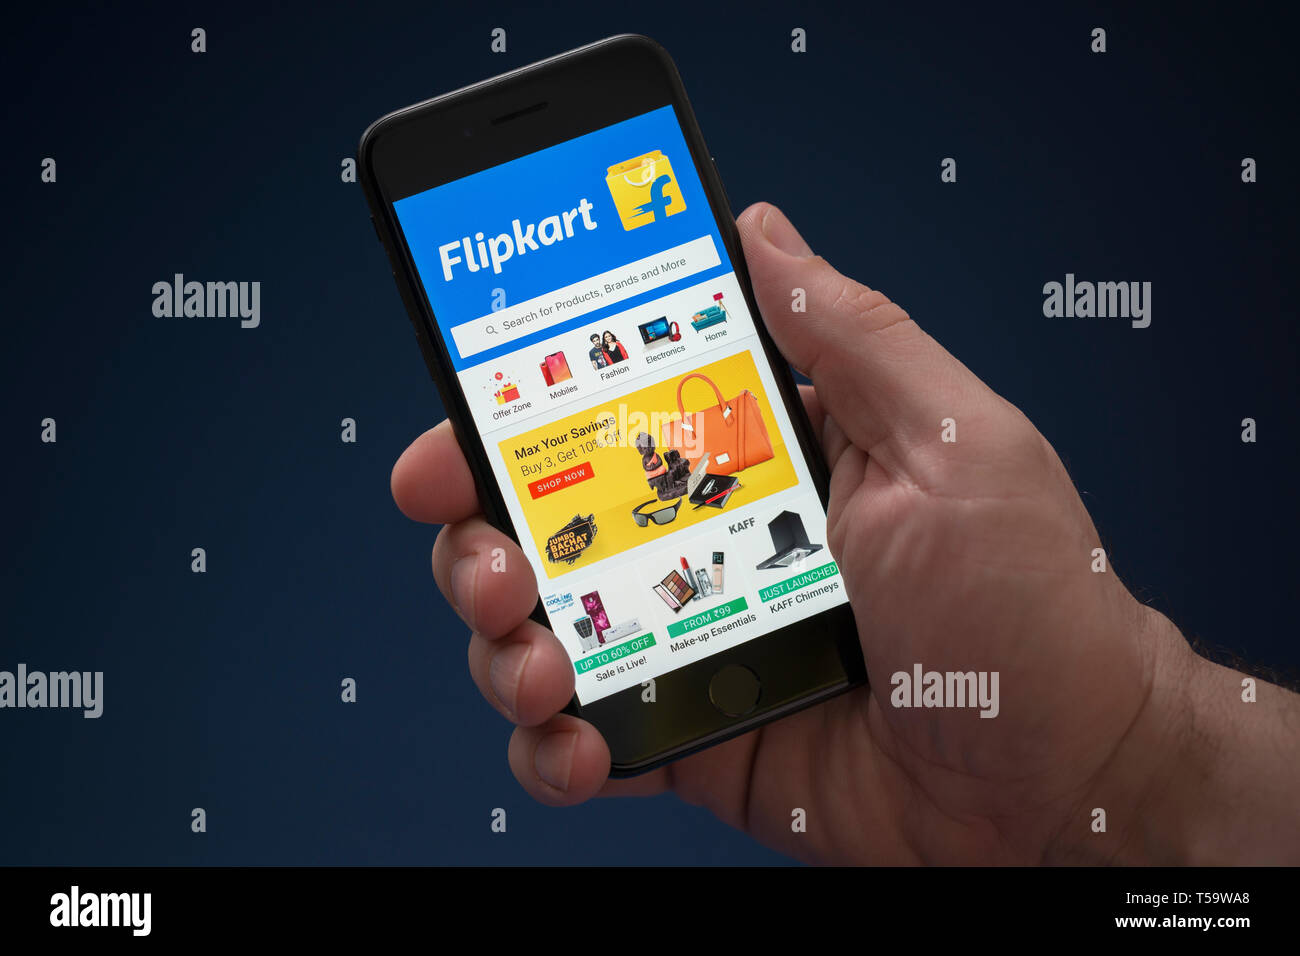 A man looks at his iPhone which displays the Flipkart logo (Editorial use only). Stock Photo